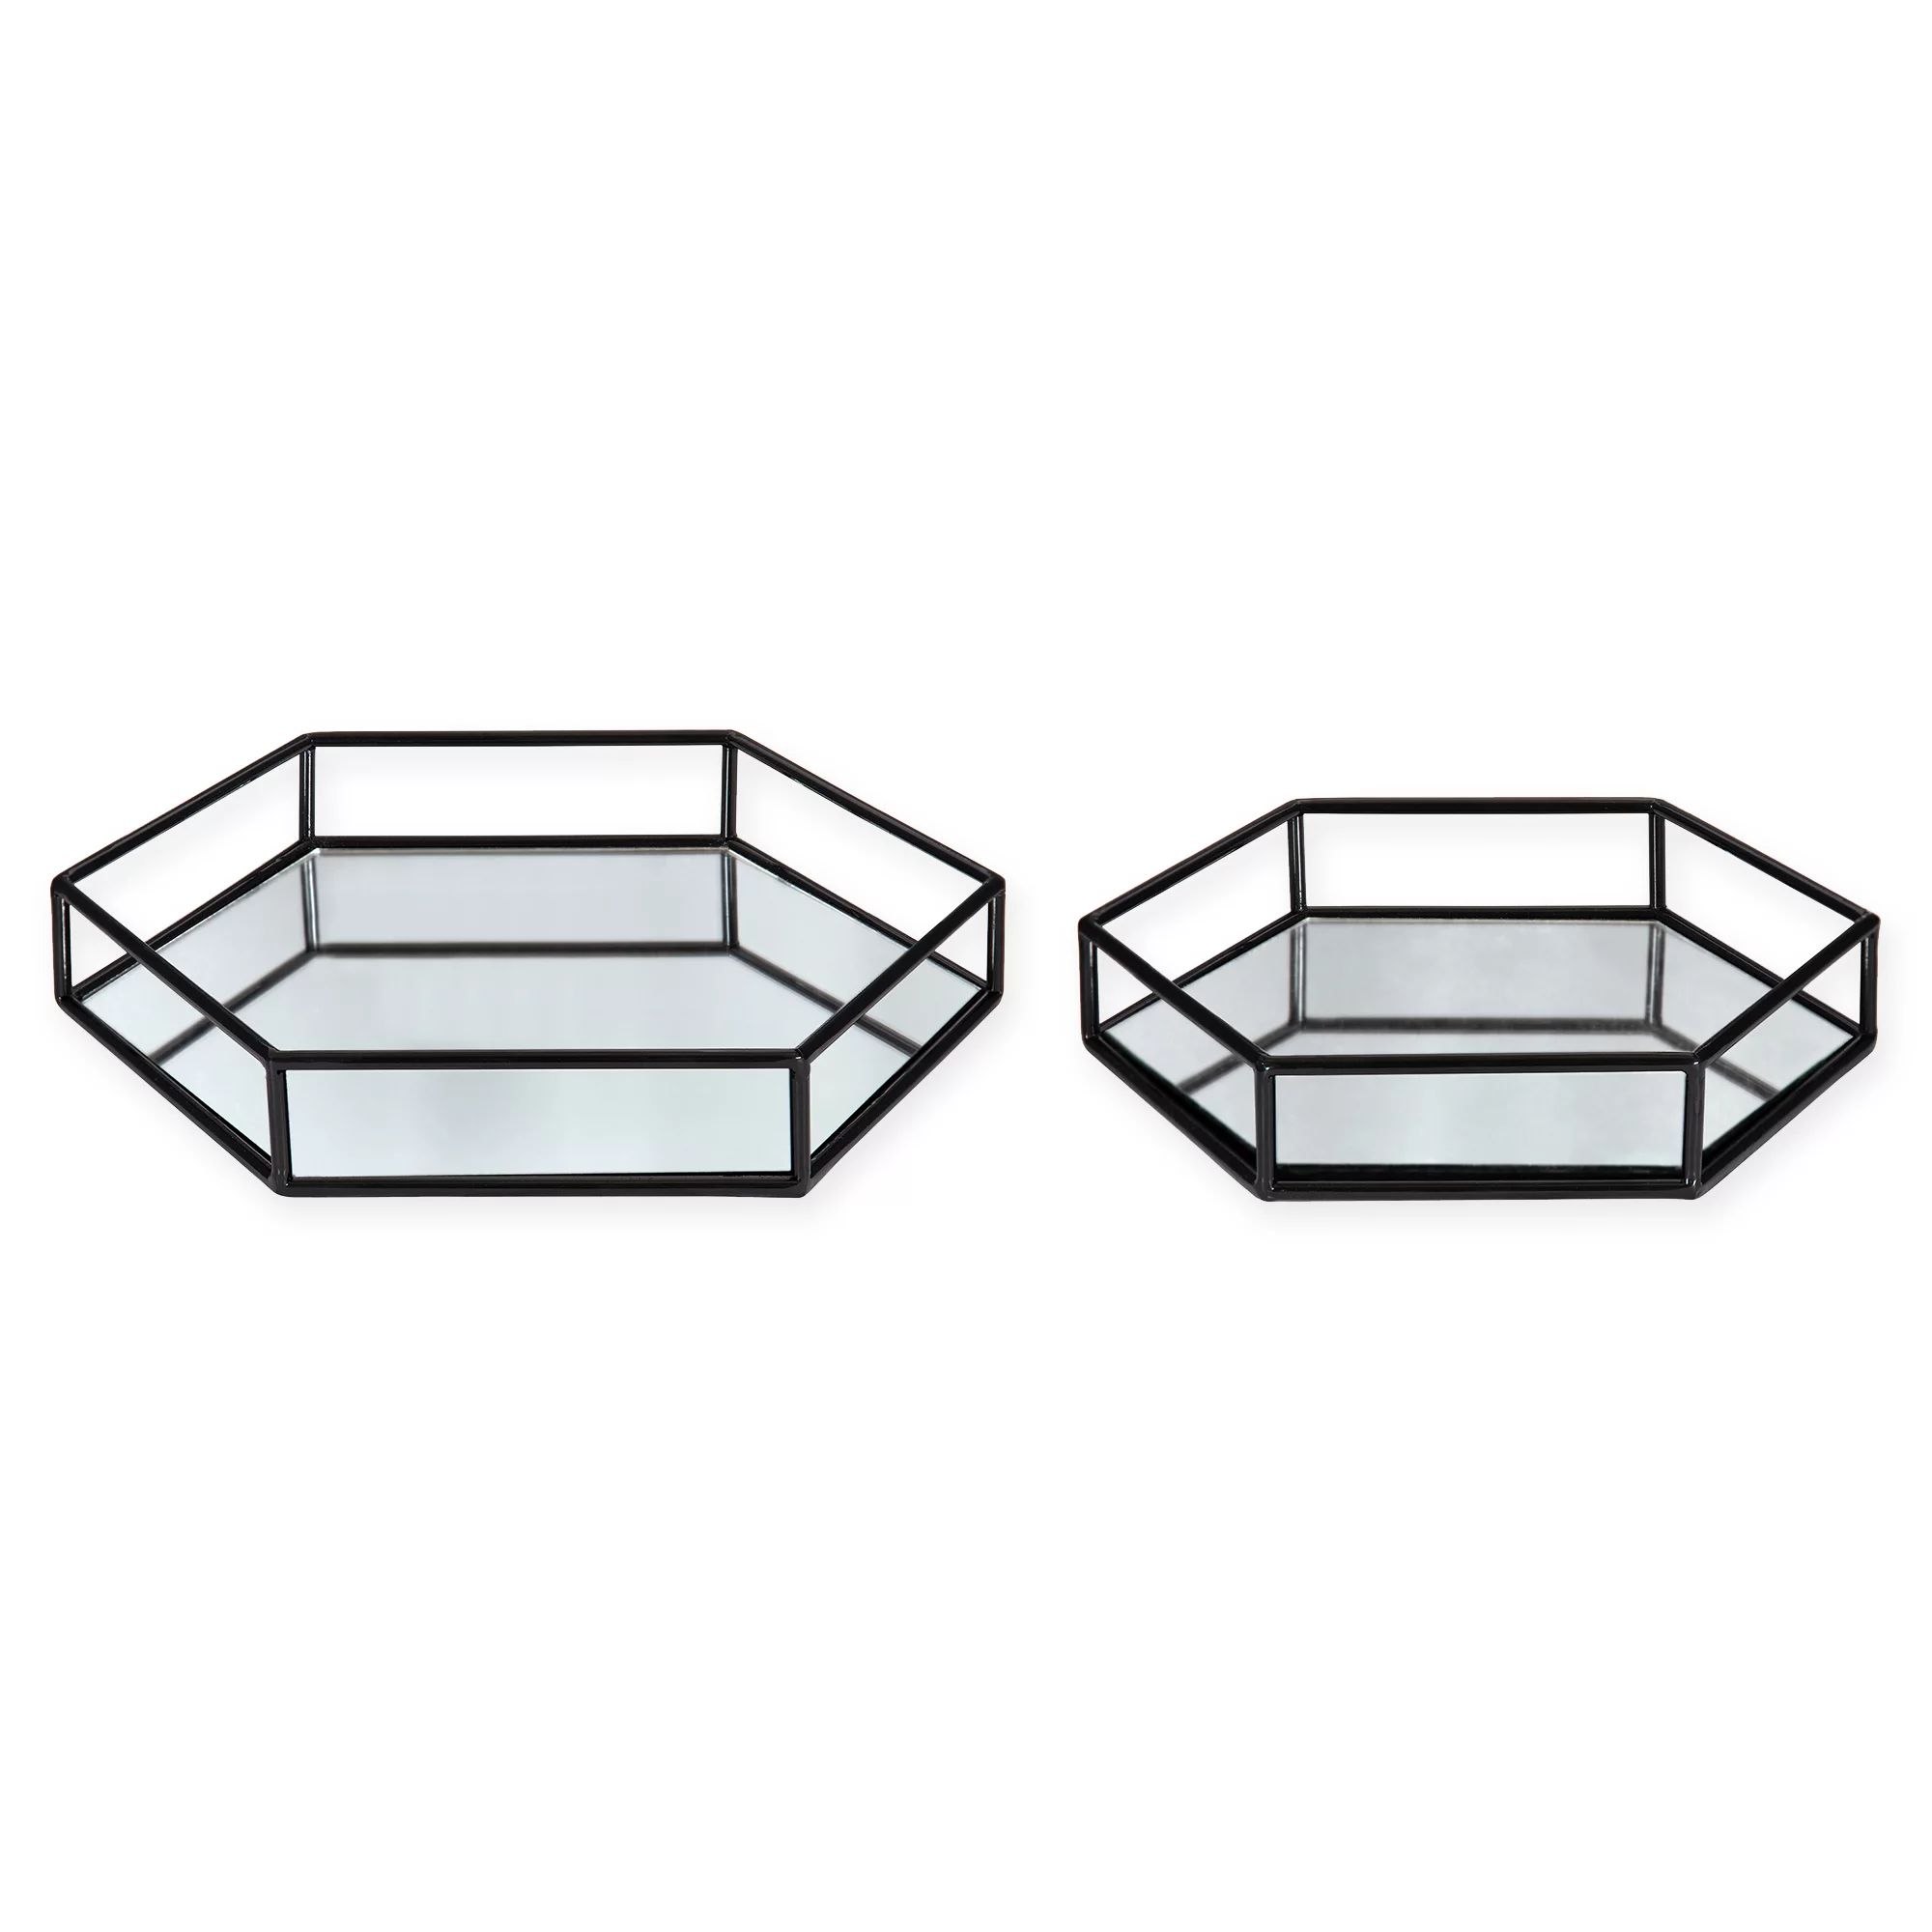 Kate and Laurel Felicia Mirrored Hexagonal Trays (Set of 2) | Bed Bath & Beyond | Bed Bath & Beyond